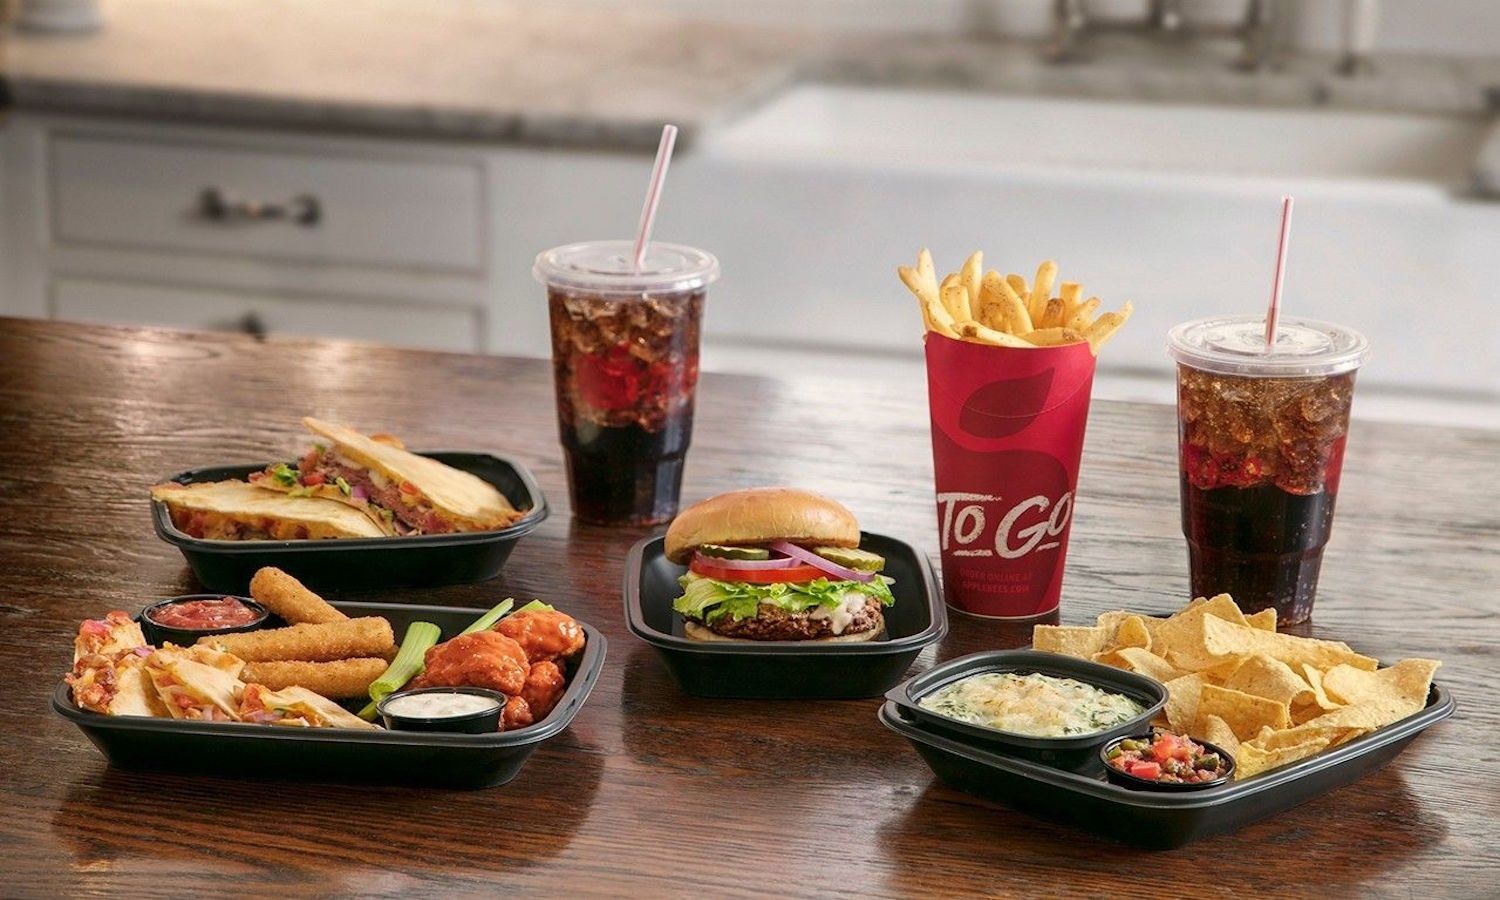 Applebee’s Takeout Near You in Hutchinson